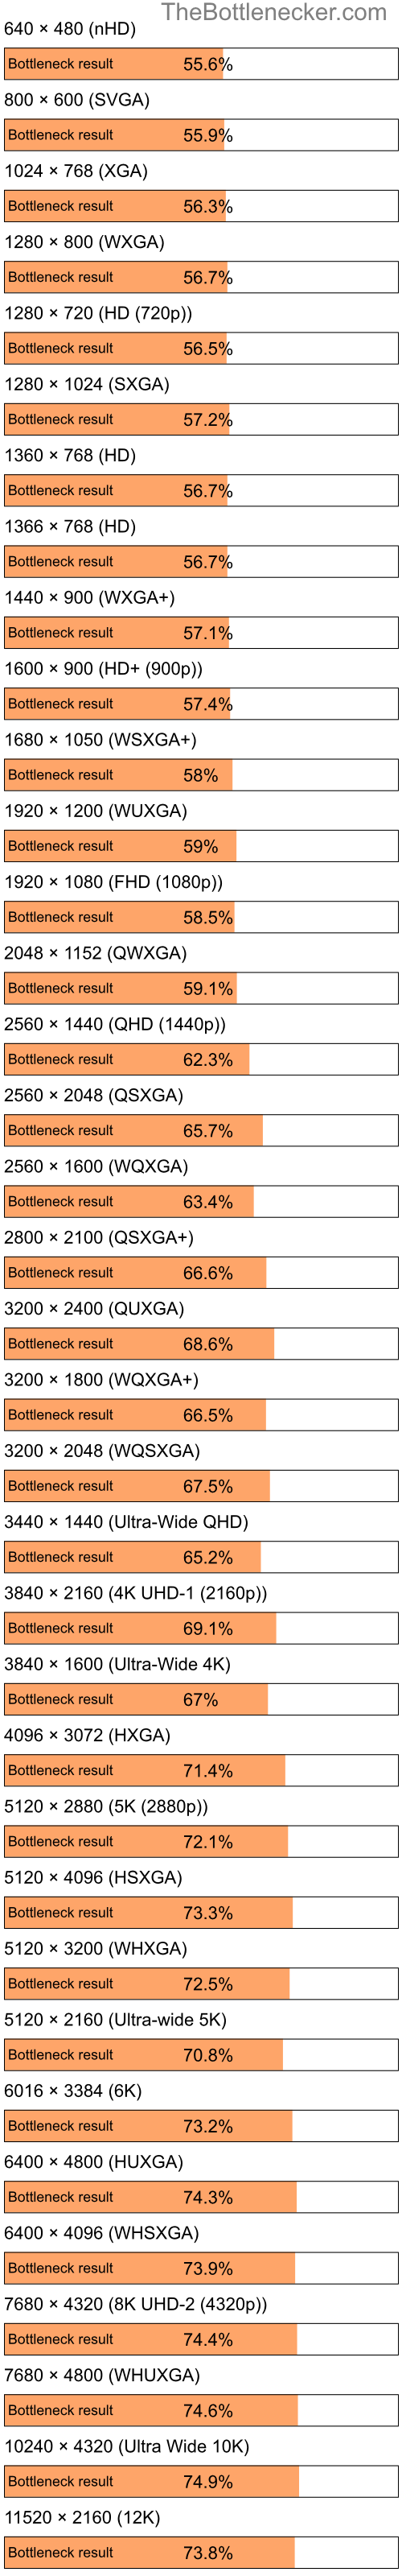 Bottleneck results by resolution for Intel Celeron M 420 and AMD Mobility Radeon HD 4200 in Processor Intense Tasks